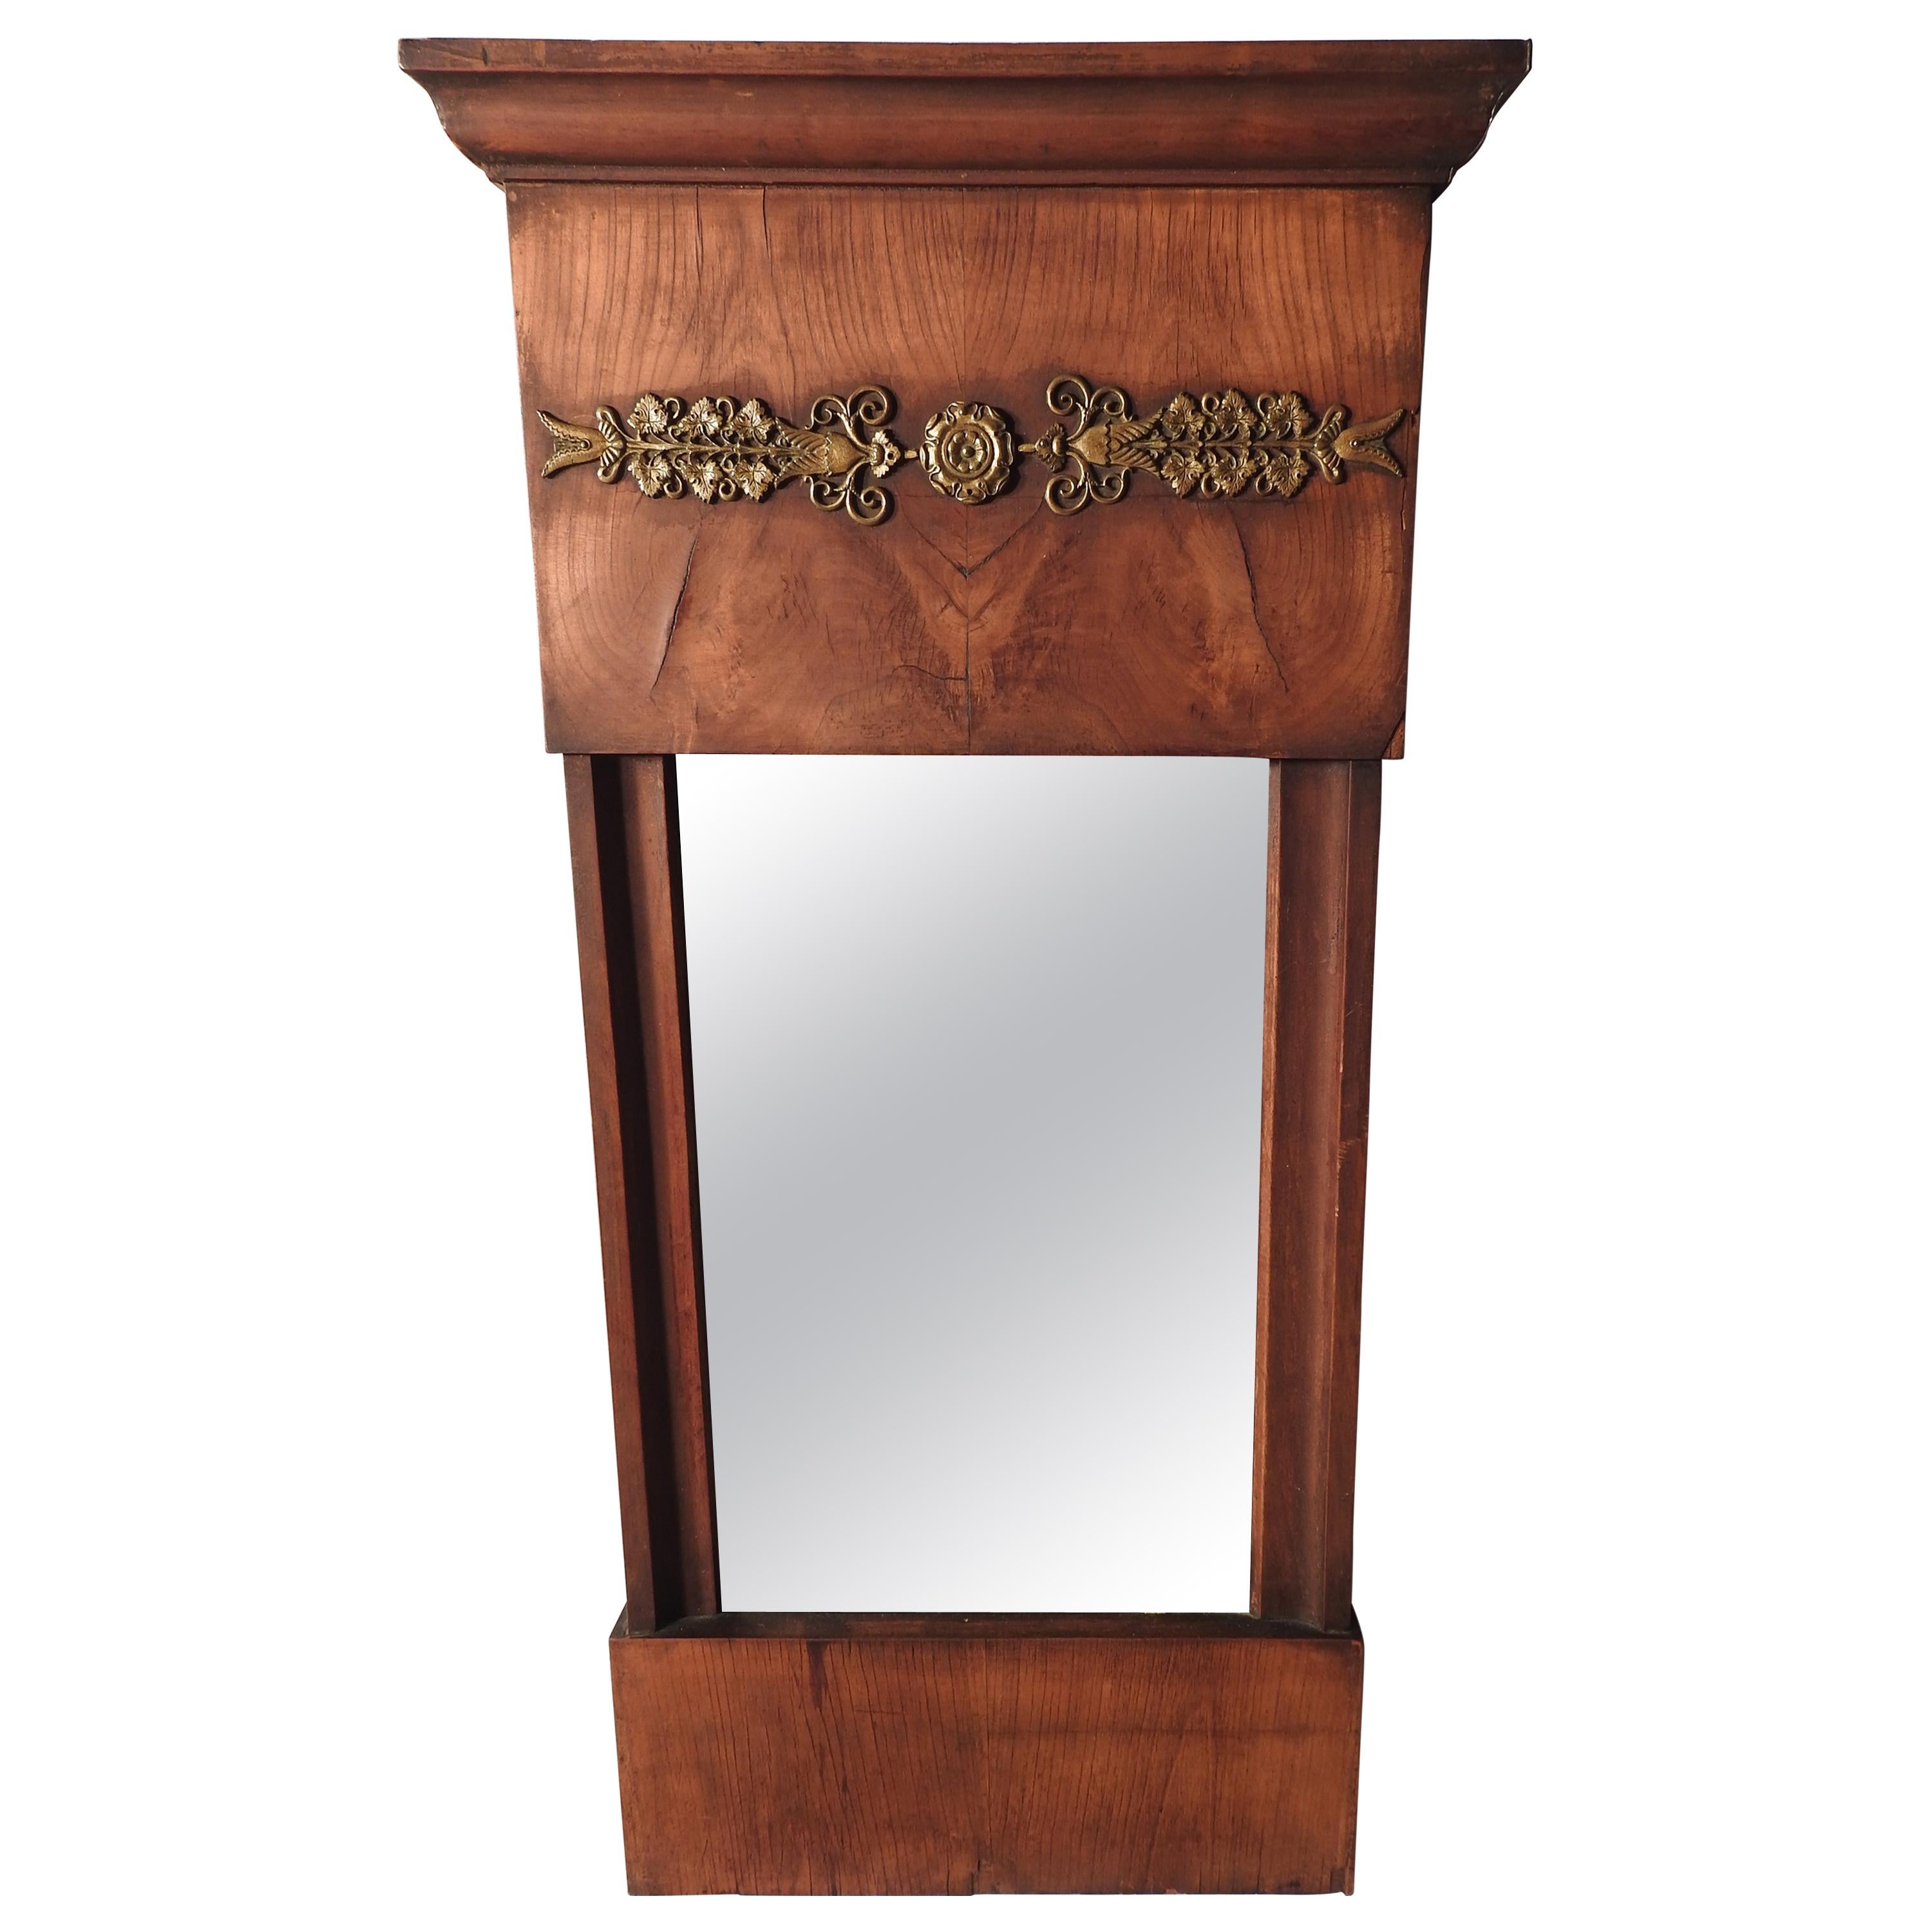 Offering this gorgeous burled wood French wall mirror. The bottom starts just a nice piece of burled wood. Going up from there the sides are the same. At the top is more burled wood and a trim piece and in the center is a long narrow piece of brass